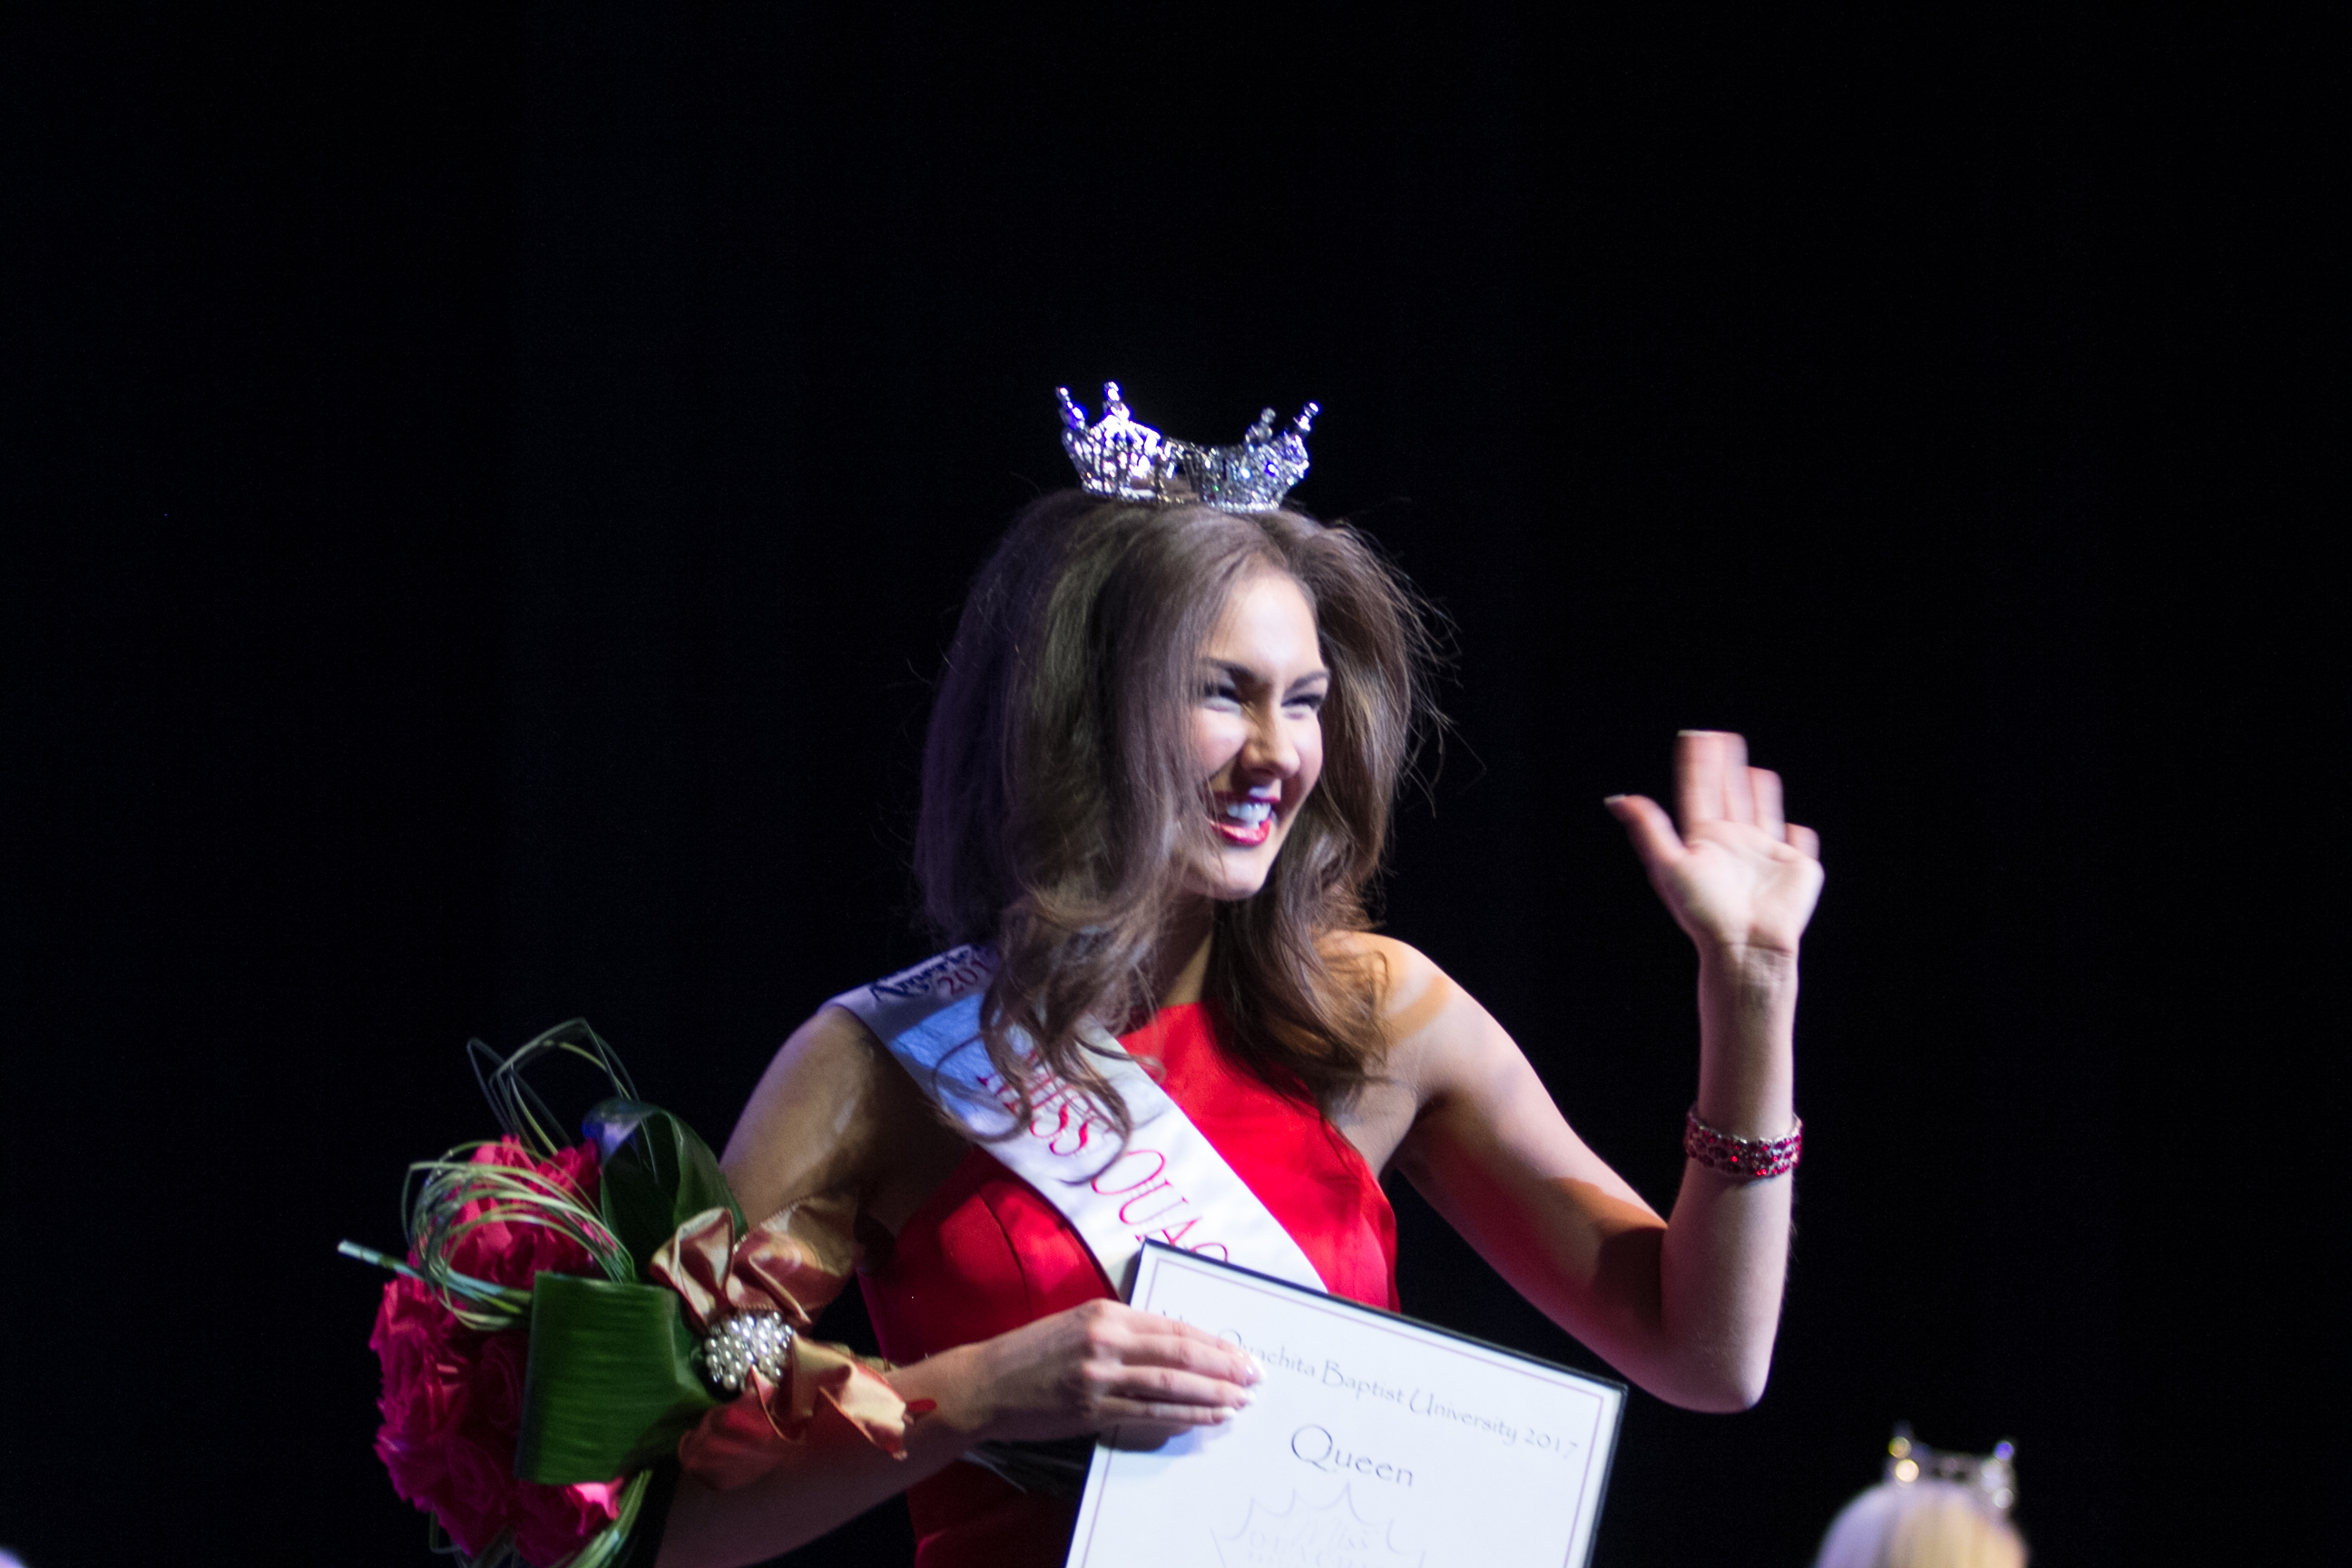 Ouachita to host 51st Miss OBU Scholarship Pageant March 3.